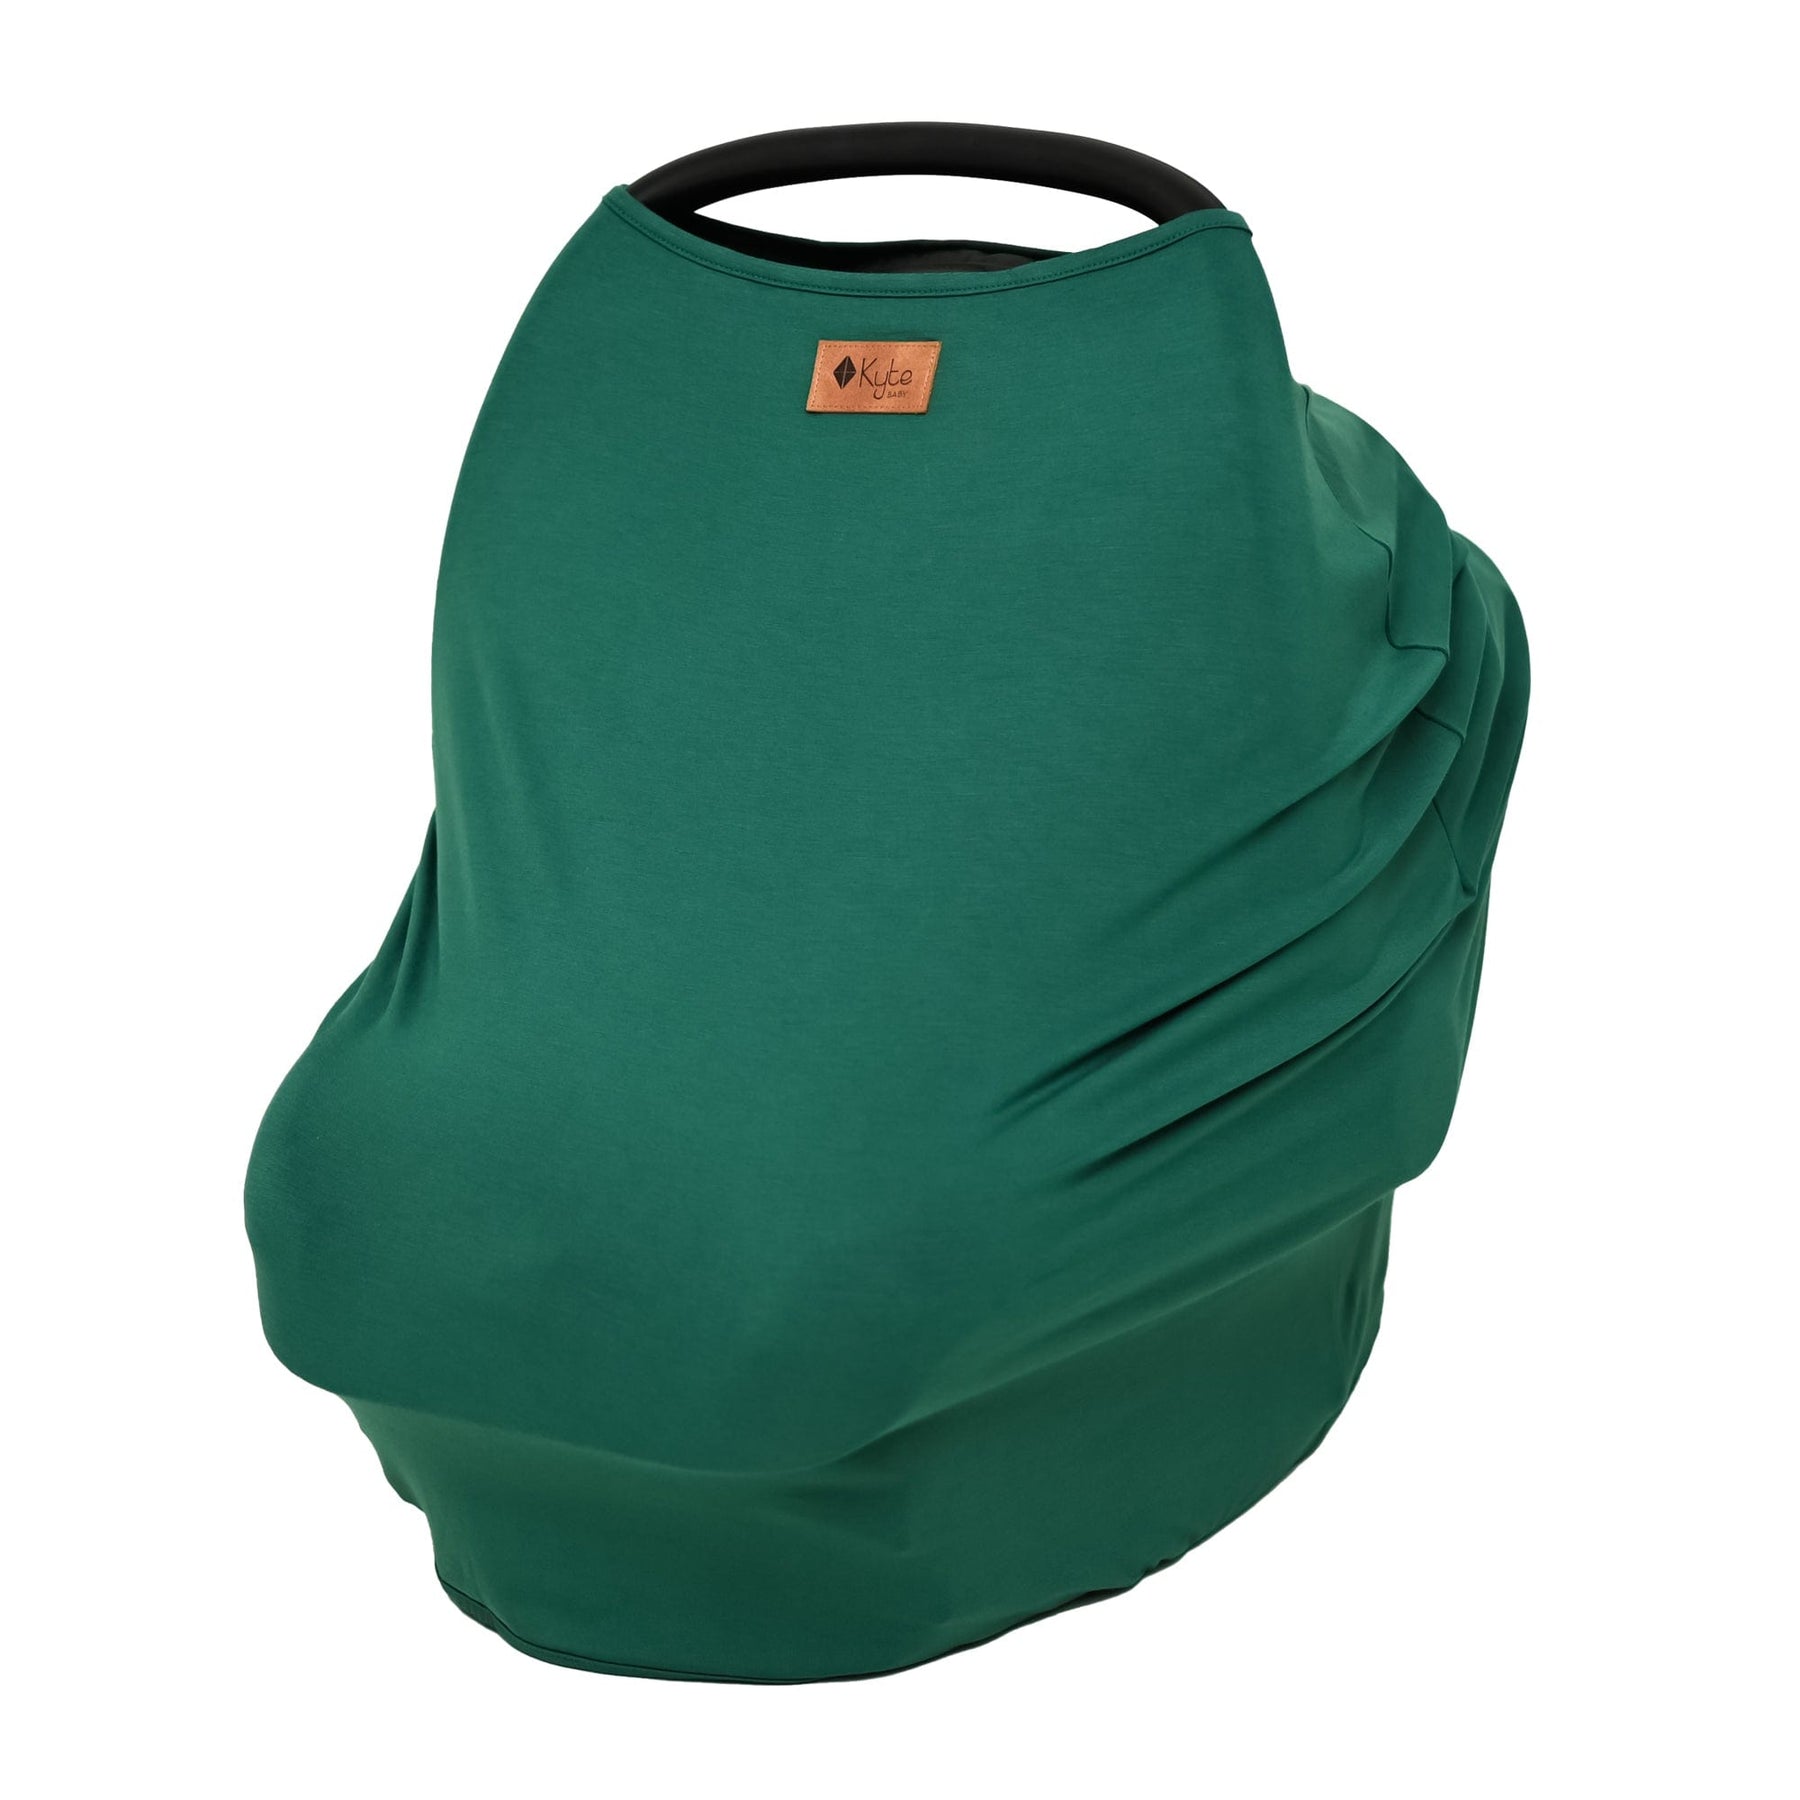 Kyte BABY Car Seat Cover Emerald Car Seat Cover in Emerald